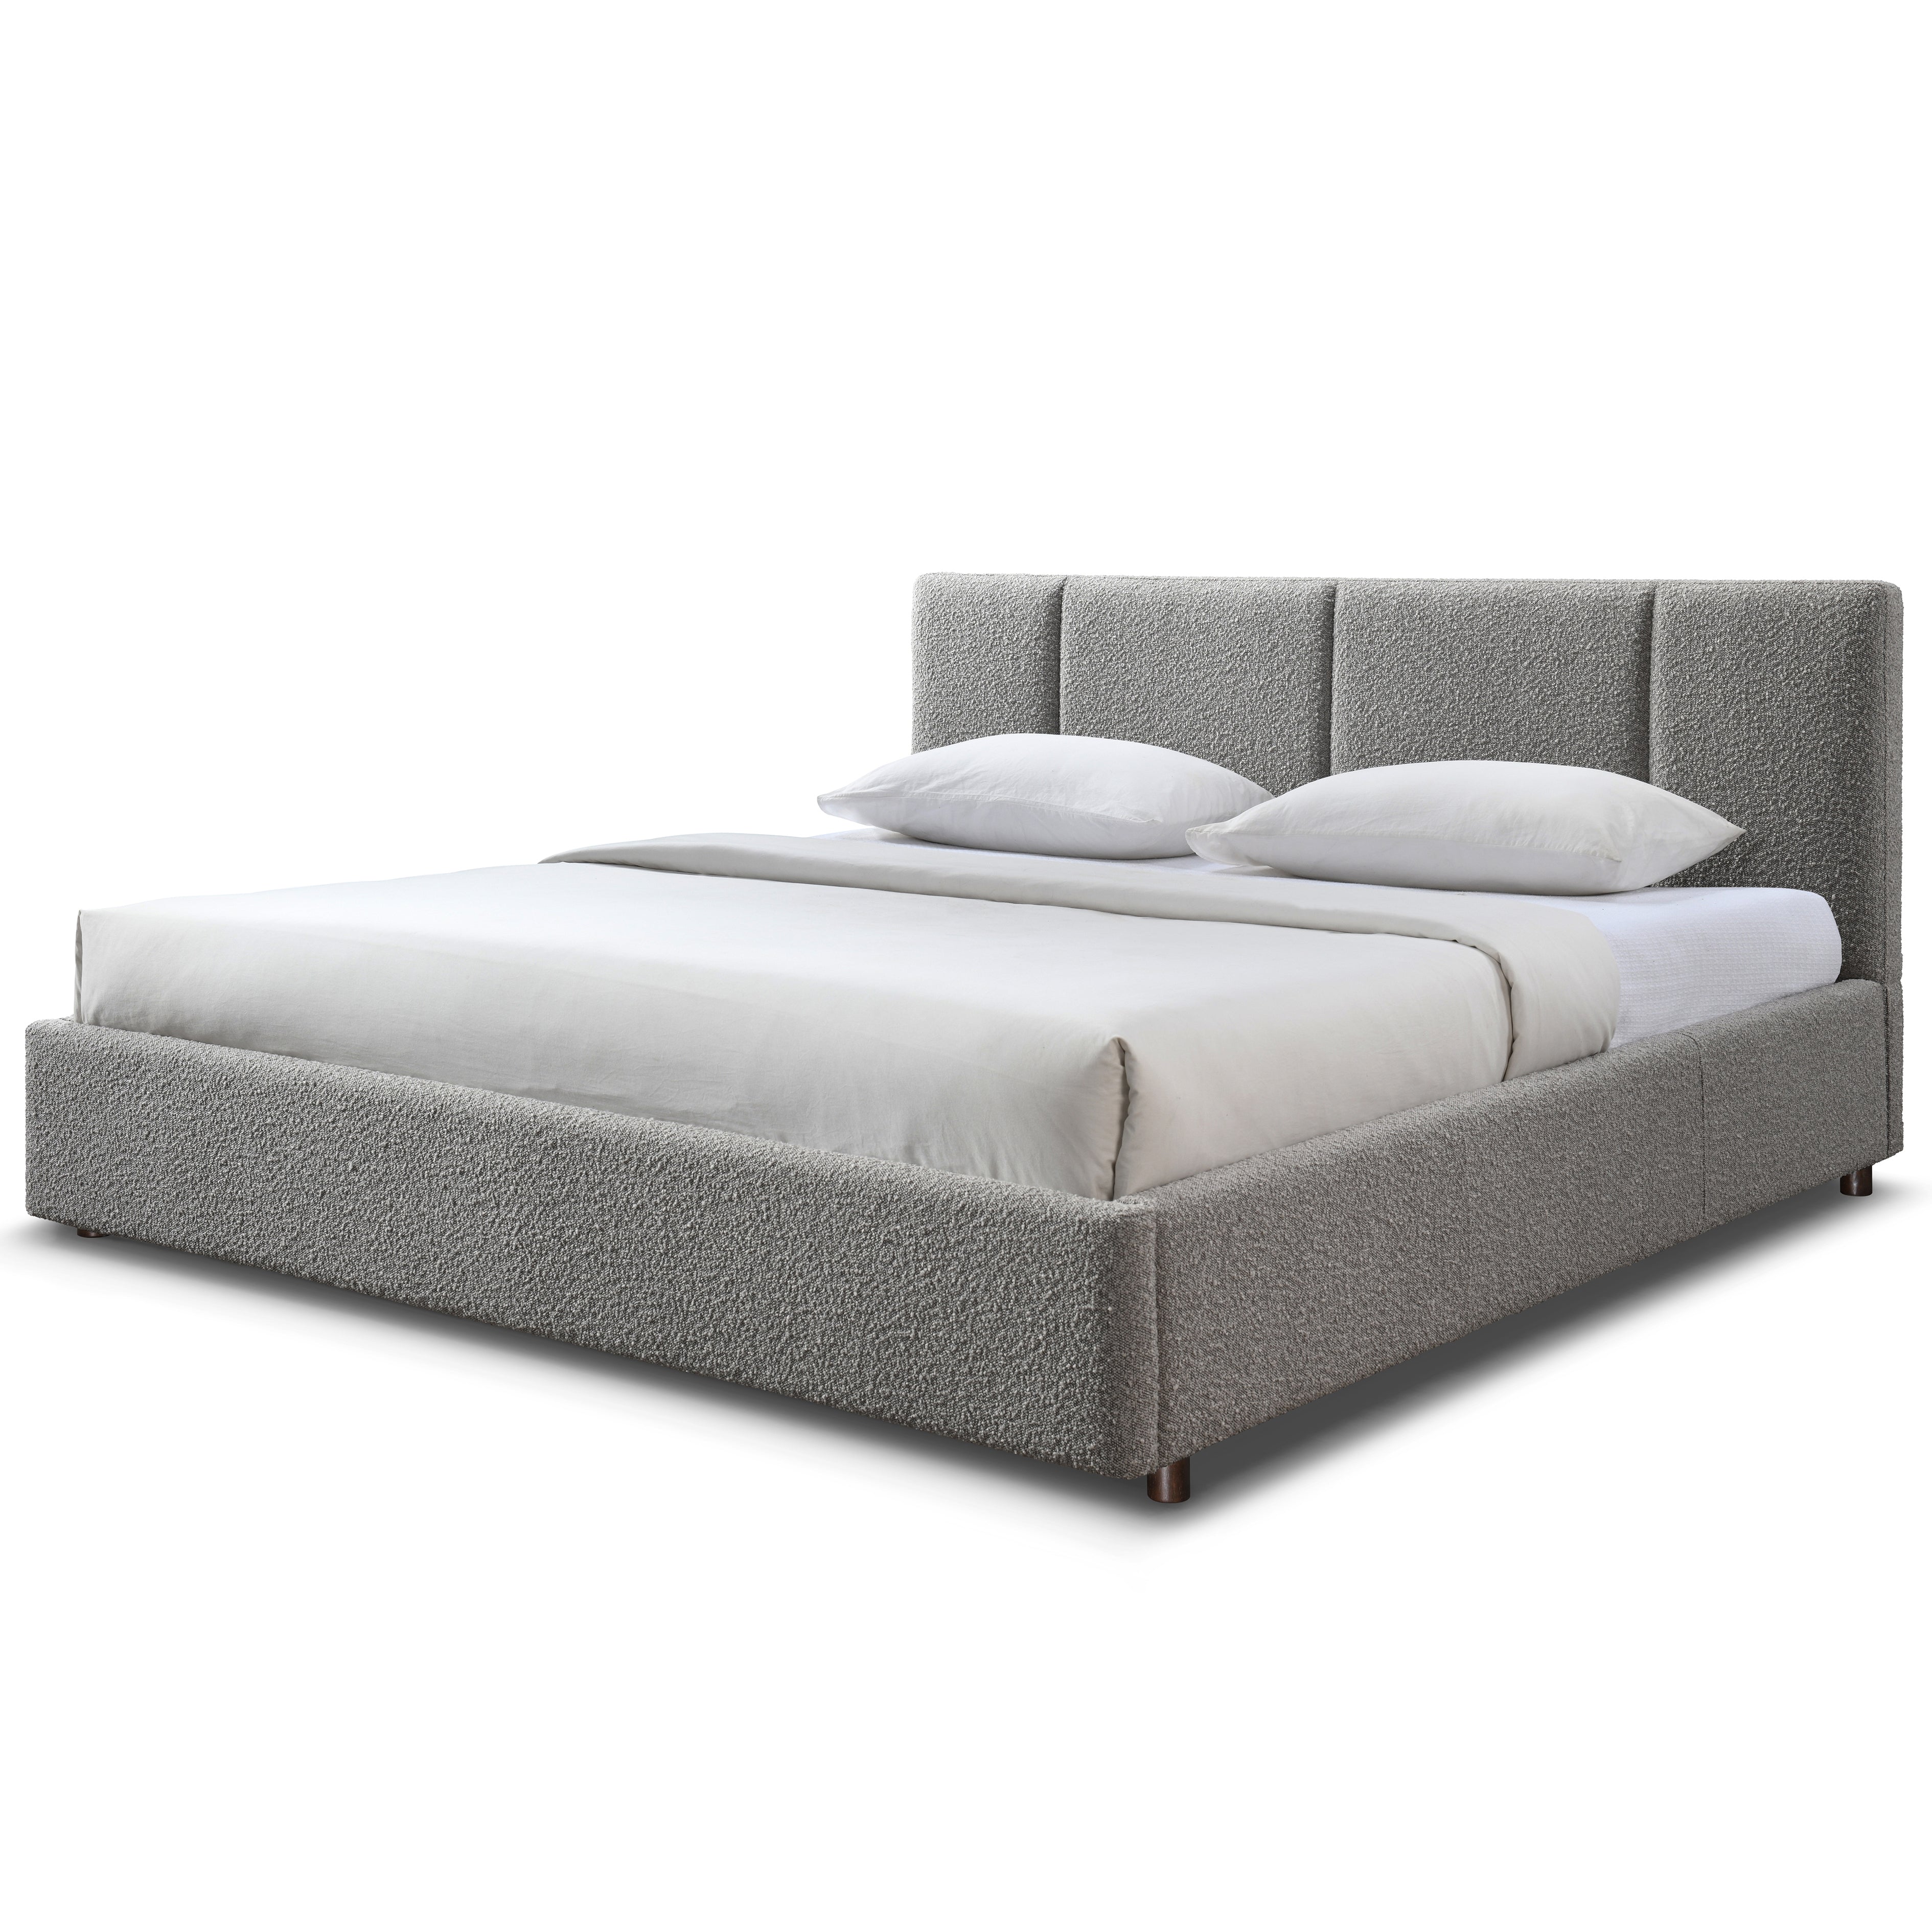 Venice Upholstered Platform King Bed, Gray Boucle Fabric